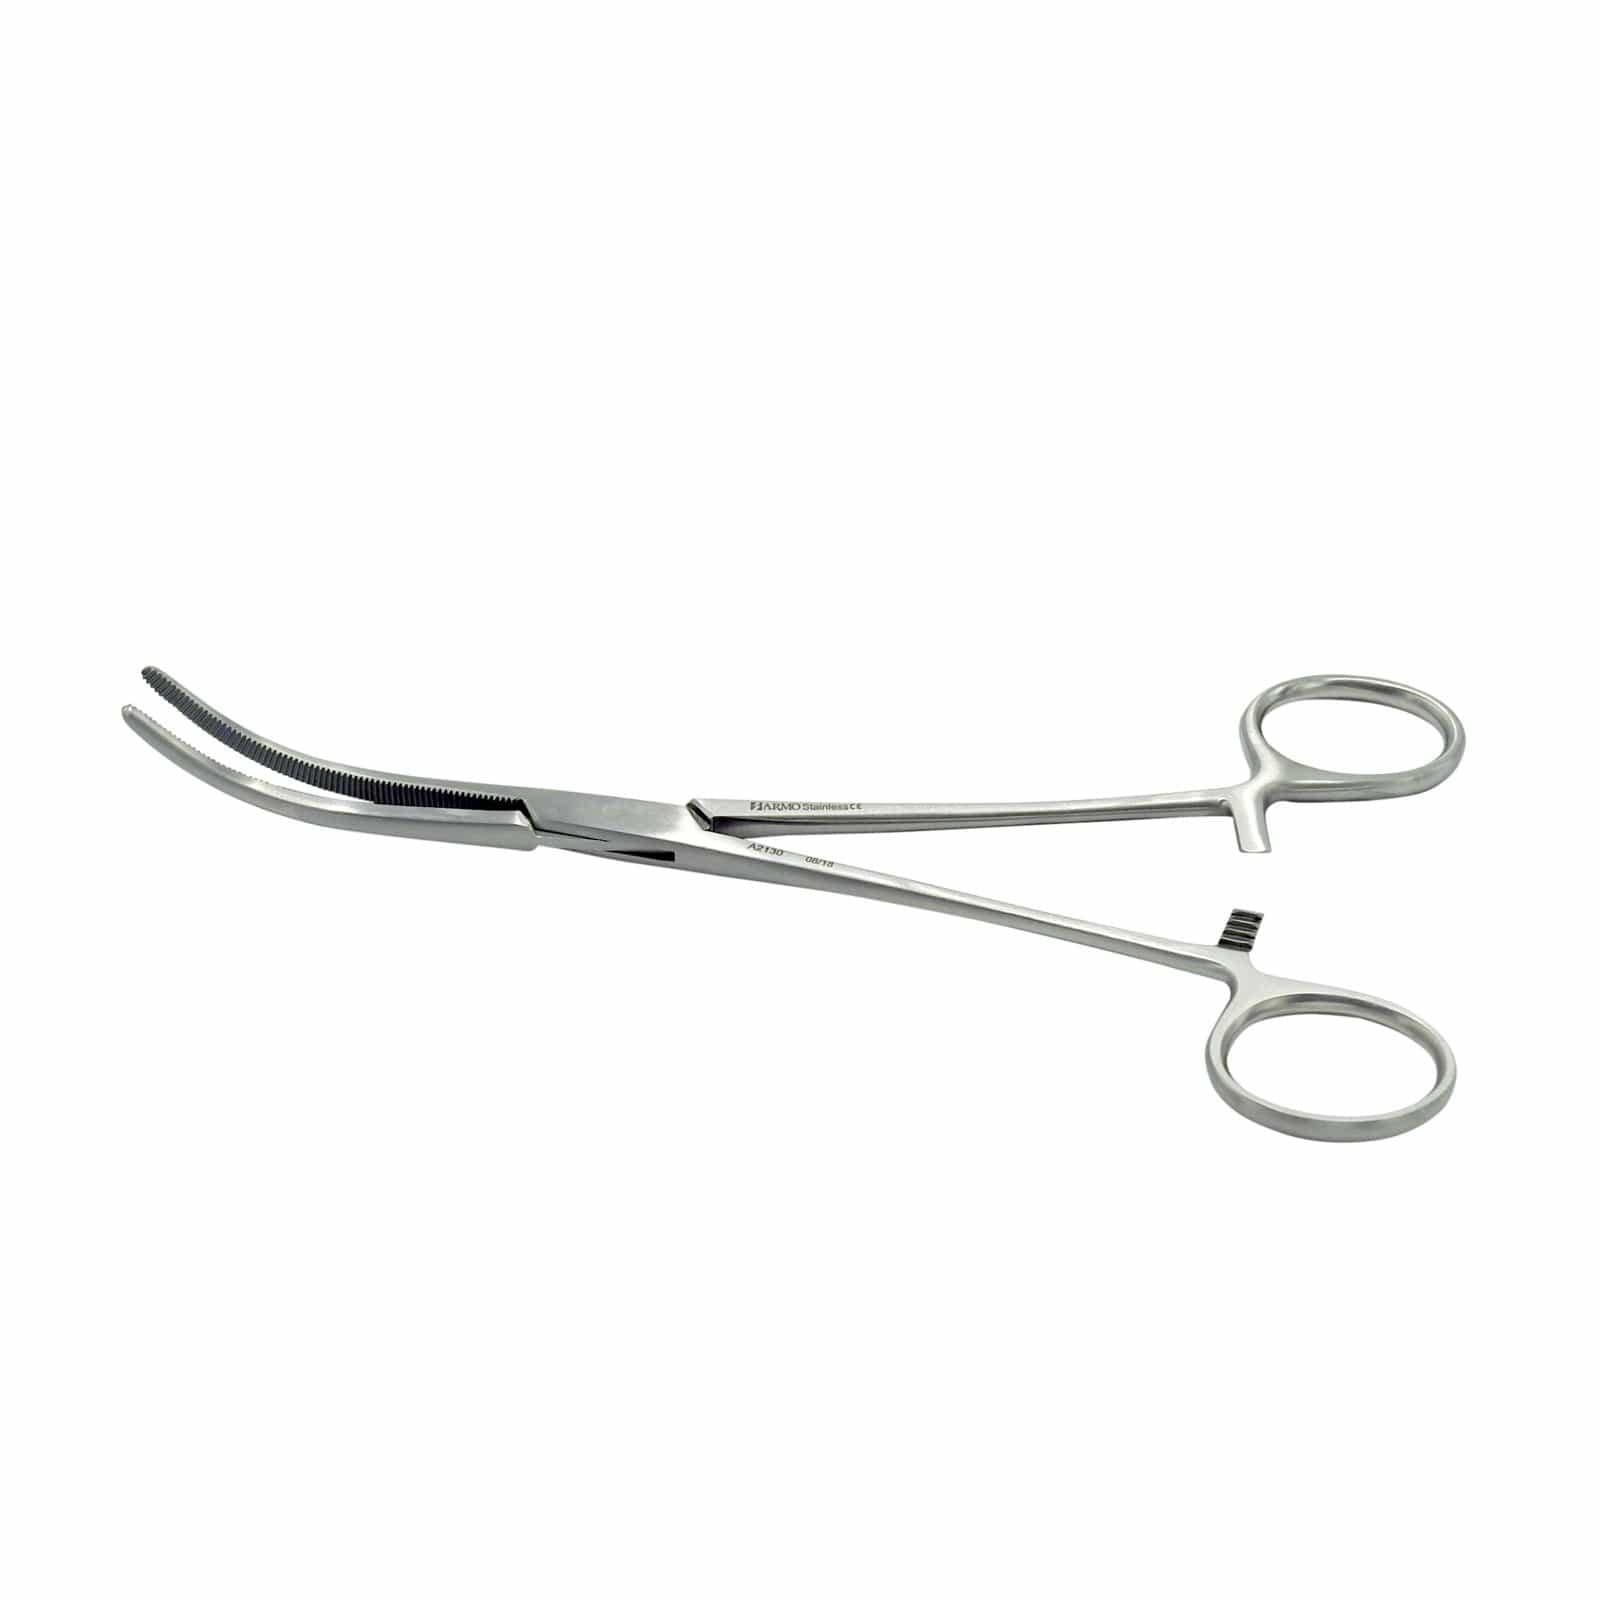 Armo Surgical Instruments 20cm / Curved Armo Pean Rochester Artery Forcep